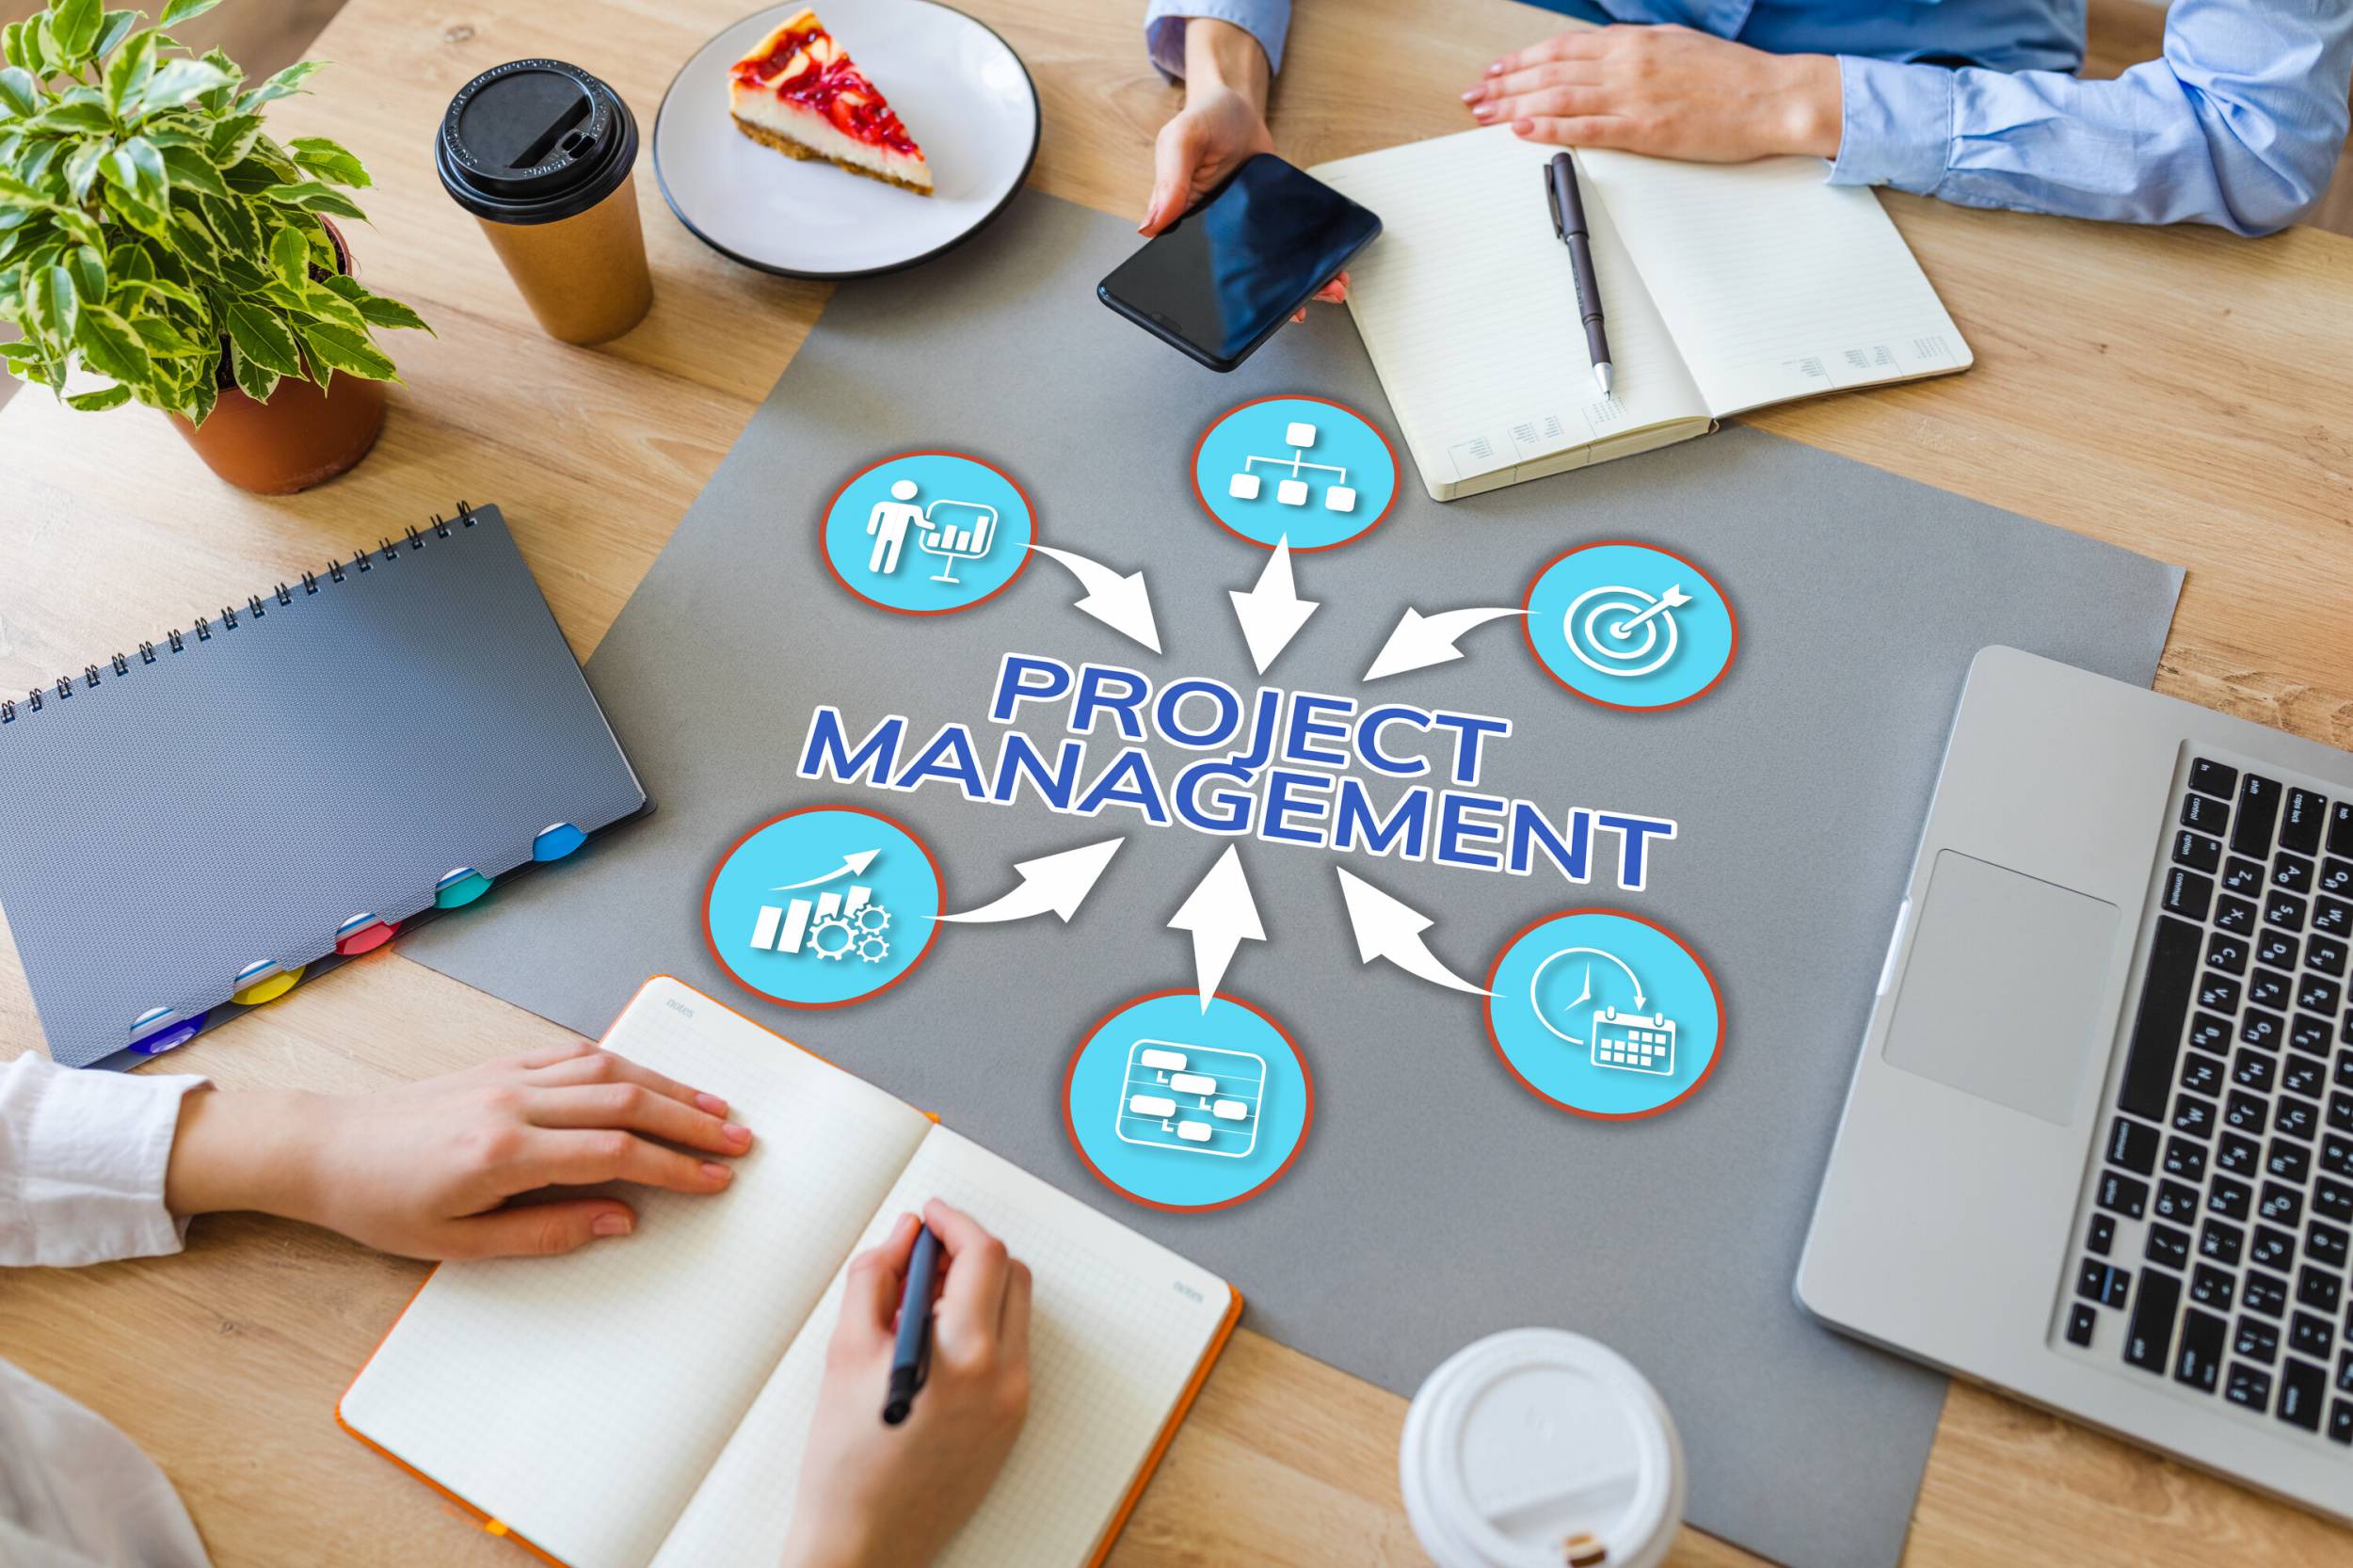 Project management Masterclass London weekday classes